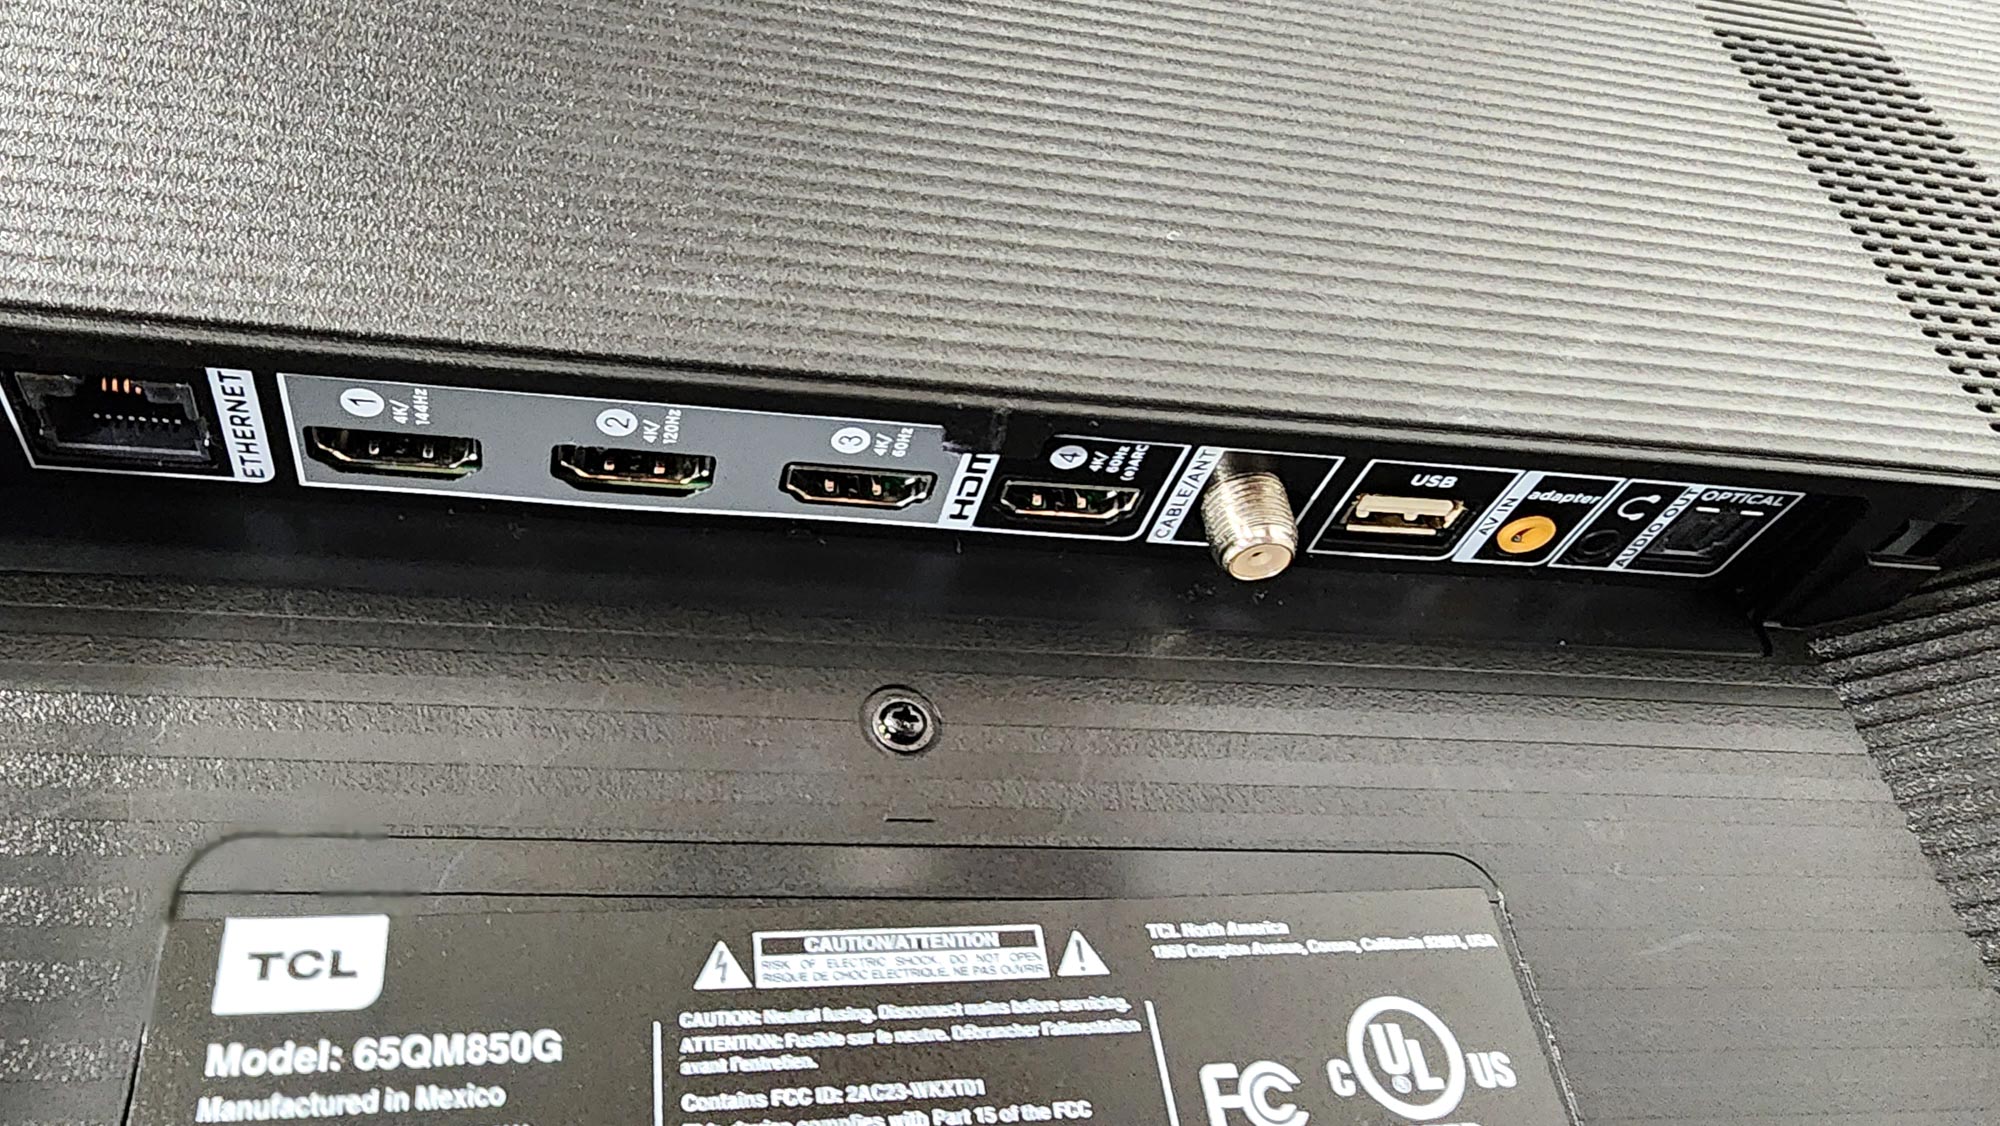 TCL QM8 Mini LED TV ports shown from behind